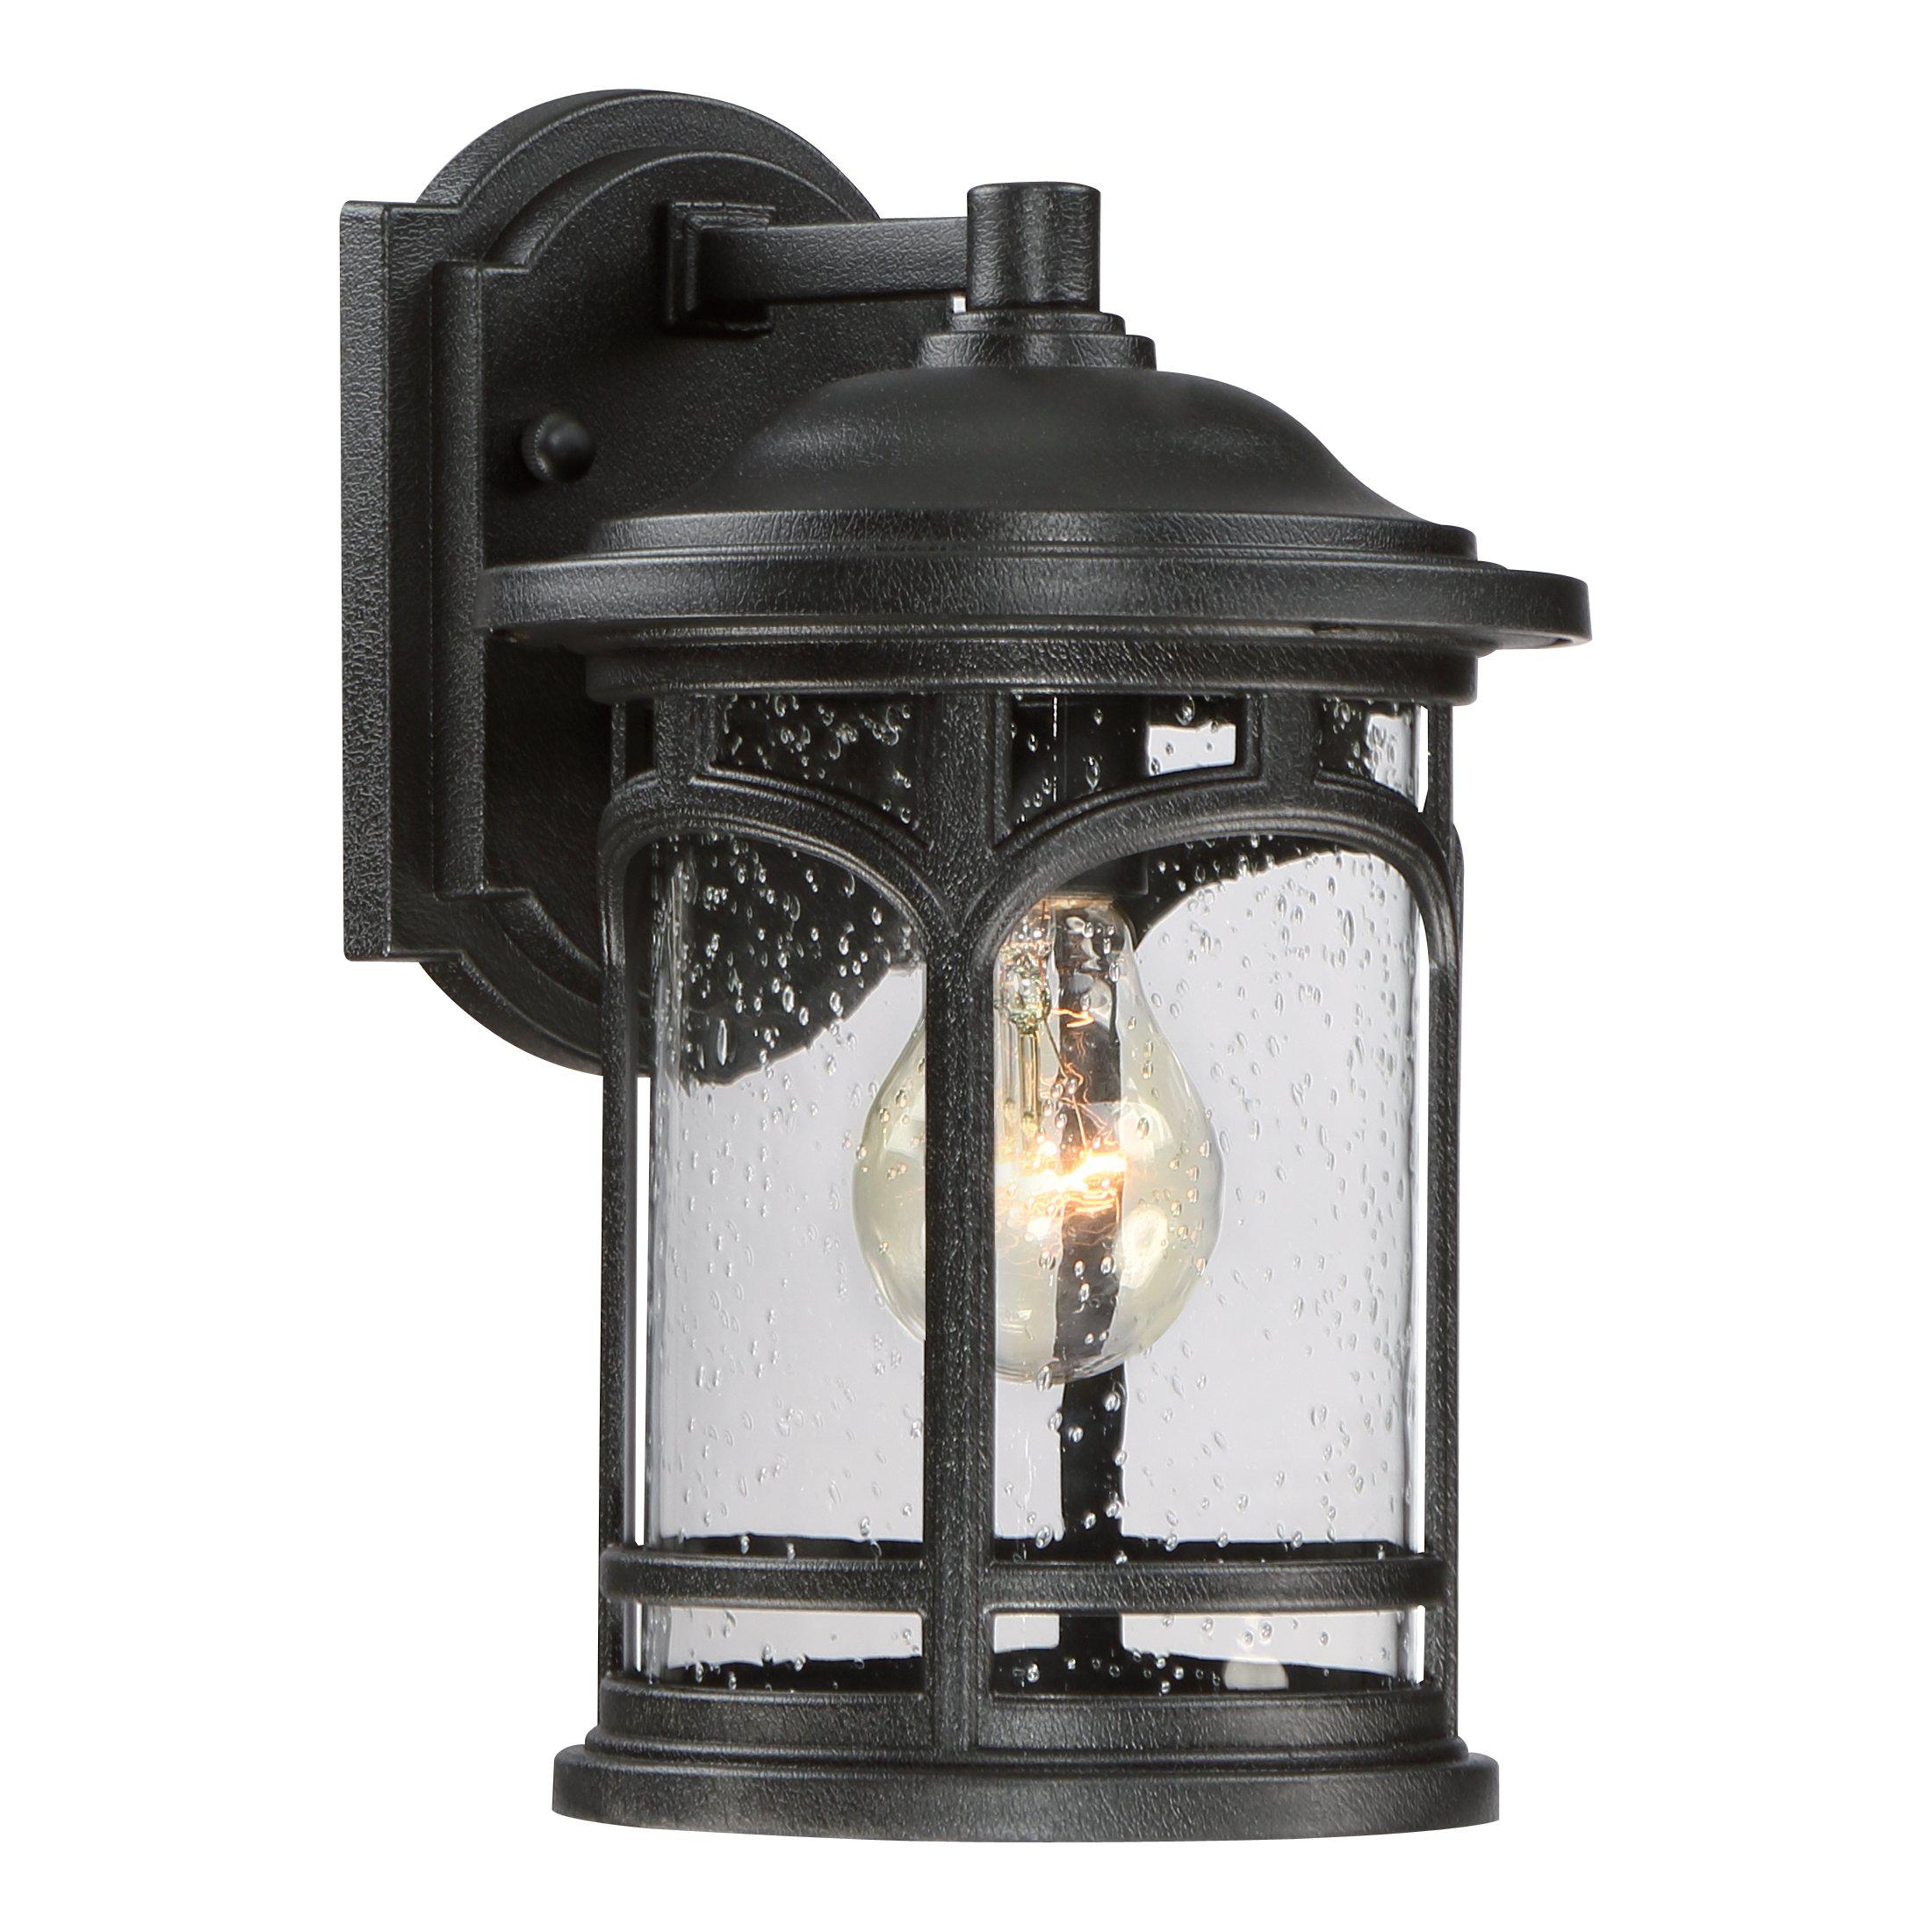 Quoizel  Marblehead Outdoor Lantern, Small Outdoor l Wall Quoizel Mystic Black  